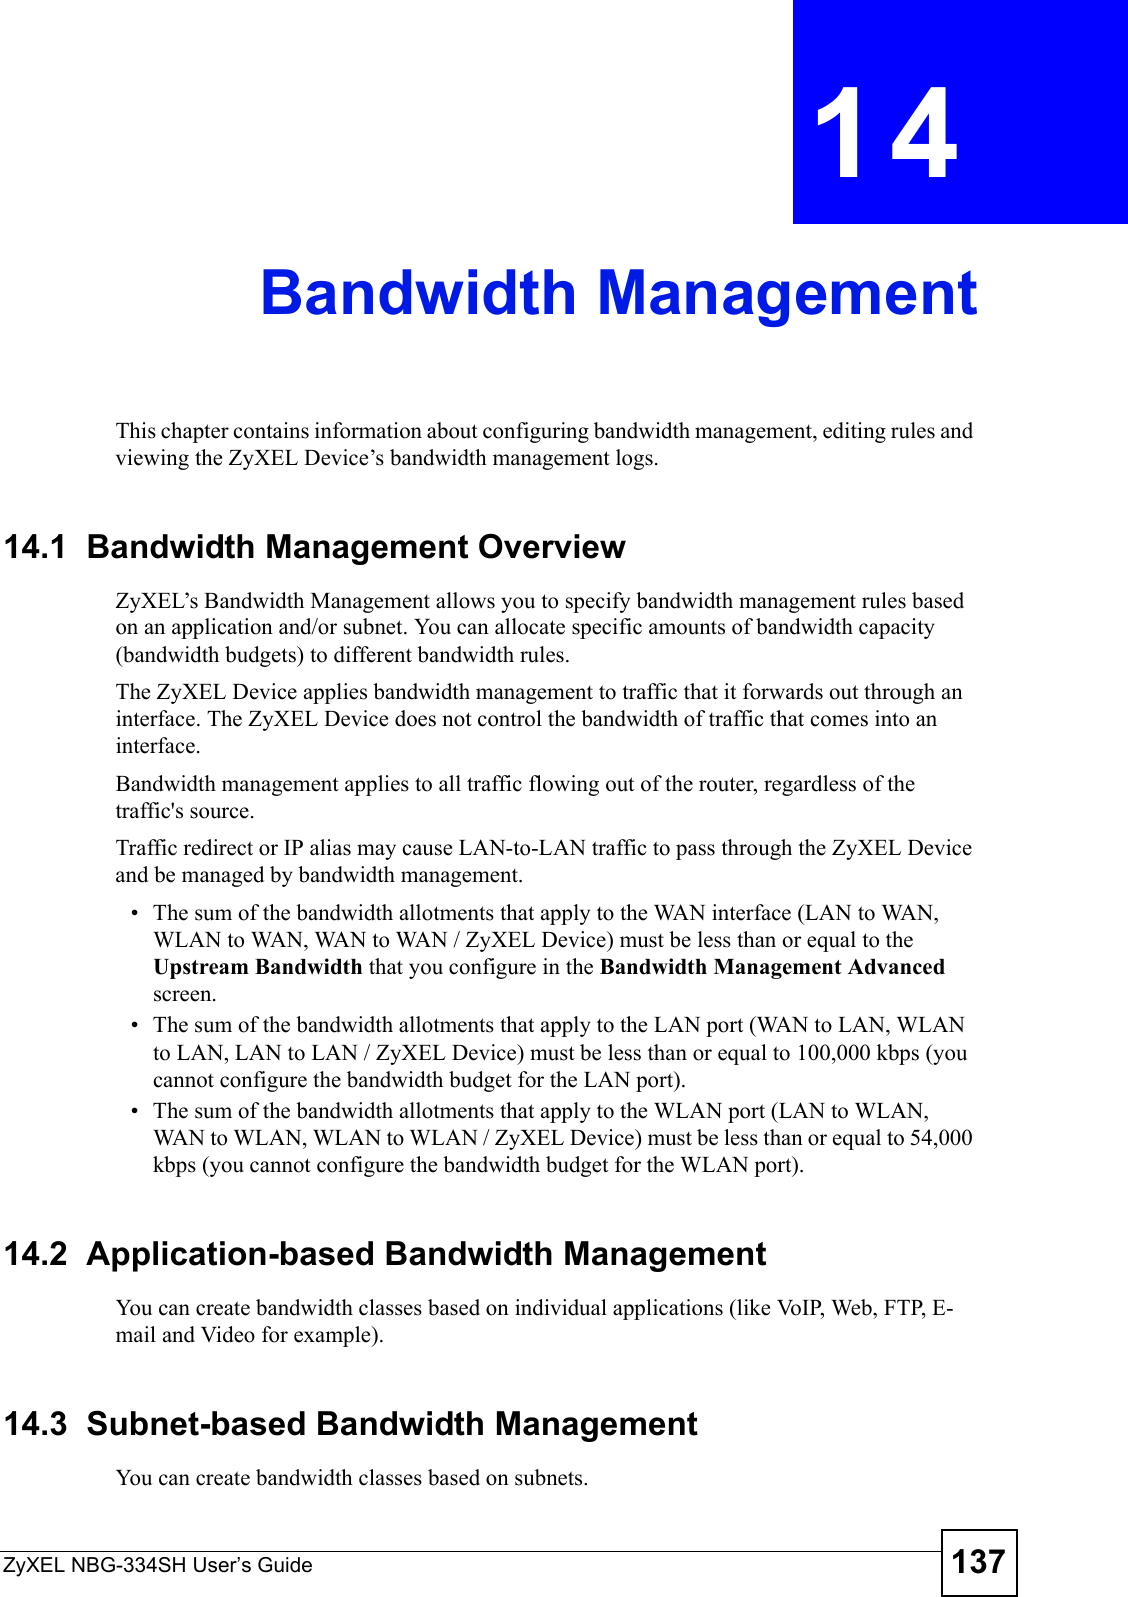 ZyXEL NBG-334SH User’s Guide 137CHAPTER  14 Bandwidth ManagementThis chapter contains information about configuring bandwidth management, editing rules and viewing the ZyXEL Device’s bandwidth management logs.14.1  Bandwidth Management Overview ZyXEL’s Bandwidth Management allows you to specify bandwidth management rules based on an application and/or subnet. You can allocate specific amounts of bandwidth capacity (bandwidth budgets) to different bandwidth rules. The ZyXEL Device applies bandwidth management to traffic that it forwards out through an interface. The ZyXEL Device does not control the bandwidth of traffic that comes into an interface.Bandwidth management applies to all traffic flowing out of the router, regardless of the traffic&apos;s source.Traffic redirect or IP alias may cause LAN-to-LAN traffic to pass through the ZyXEL Device and be managed by bandwidth management. • The sum of the bandwidth allotments that apply to the WAN interface (LAN to WAN, WLAN to WAN, WAN to WAN / ZyXEL Device) must be less than or equal to the Upstream Bandwidth that you configure in the Bandwidth Management Advanced screen. • The sum of the bandwidth allotments that apply to the LAN port (WAN to LAN, WLAN to LAN, LAN to LAN / ZyXEL Device) must be less than or equal to 100,000 kbps (you cannot configure the bandwidth budget for the LAN port). • The sum of the bandwidth allotments that apply to the WLAN port (LAN to WLAN, WAN to WLAN, WLAN to WLAN / ZyXEL Device) must be less than or equal to 54,000 kbps (you cannot configure the bandwidth budget for the WLAN port). 14.2  Application-based Bandwidth ManagementYou can create bandwidth classes based on individual applications (like VoIP, Web, FTP, E-mail and Video for example).14.3  Subnet-based Bandwidth ManagementYou can create bandwidth classes based on subnets.